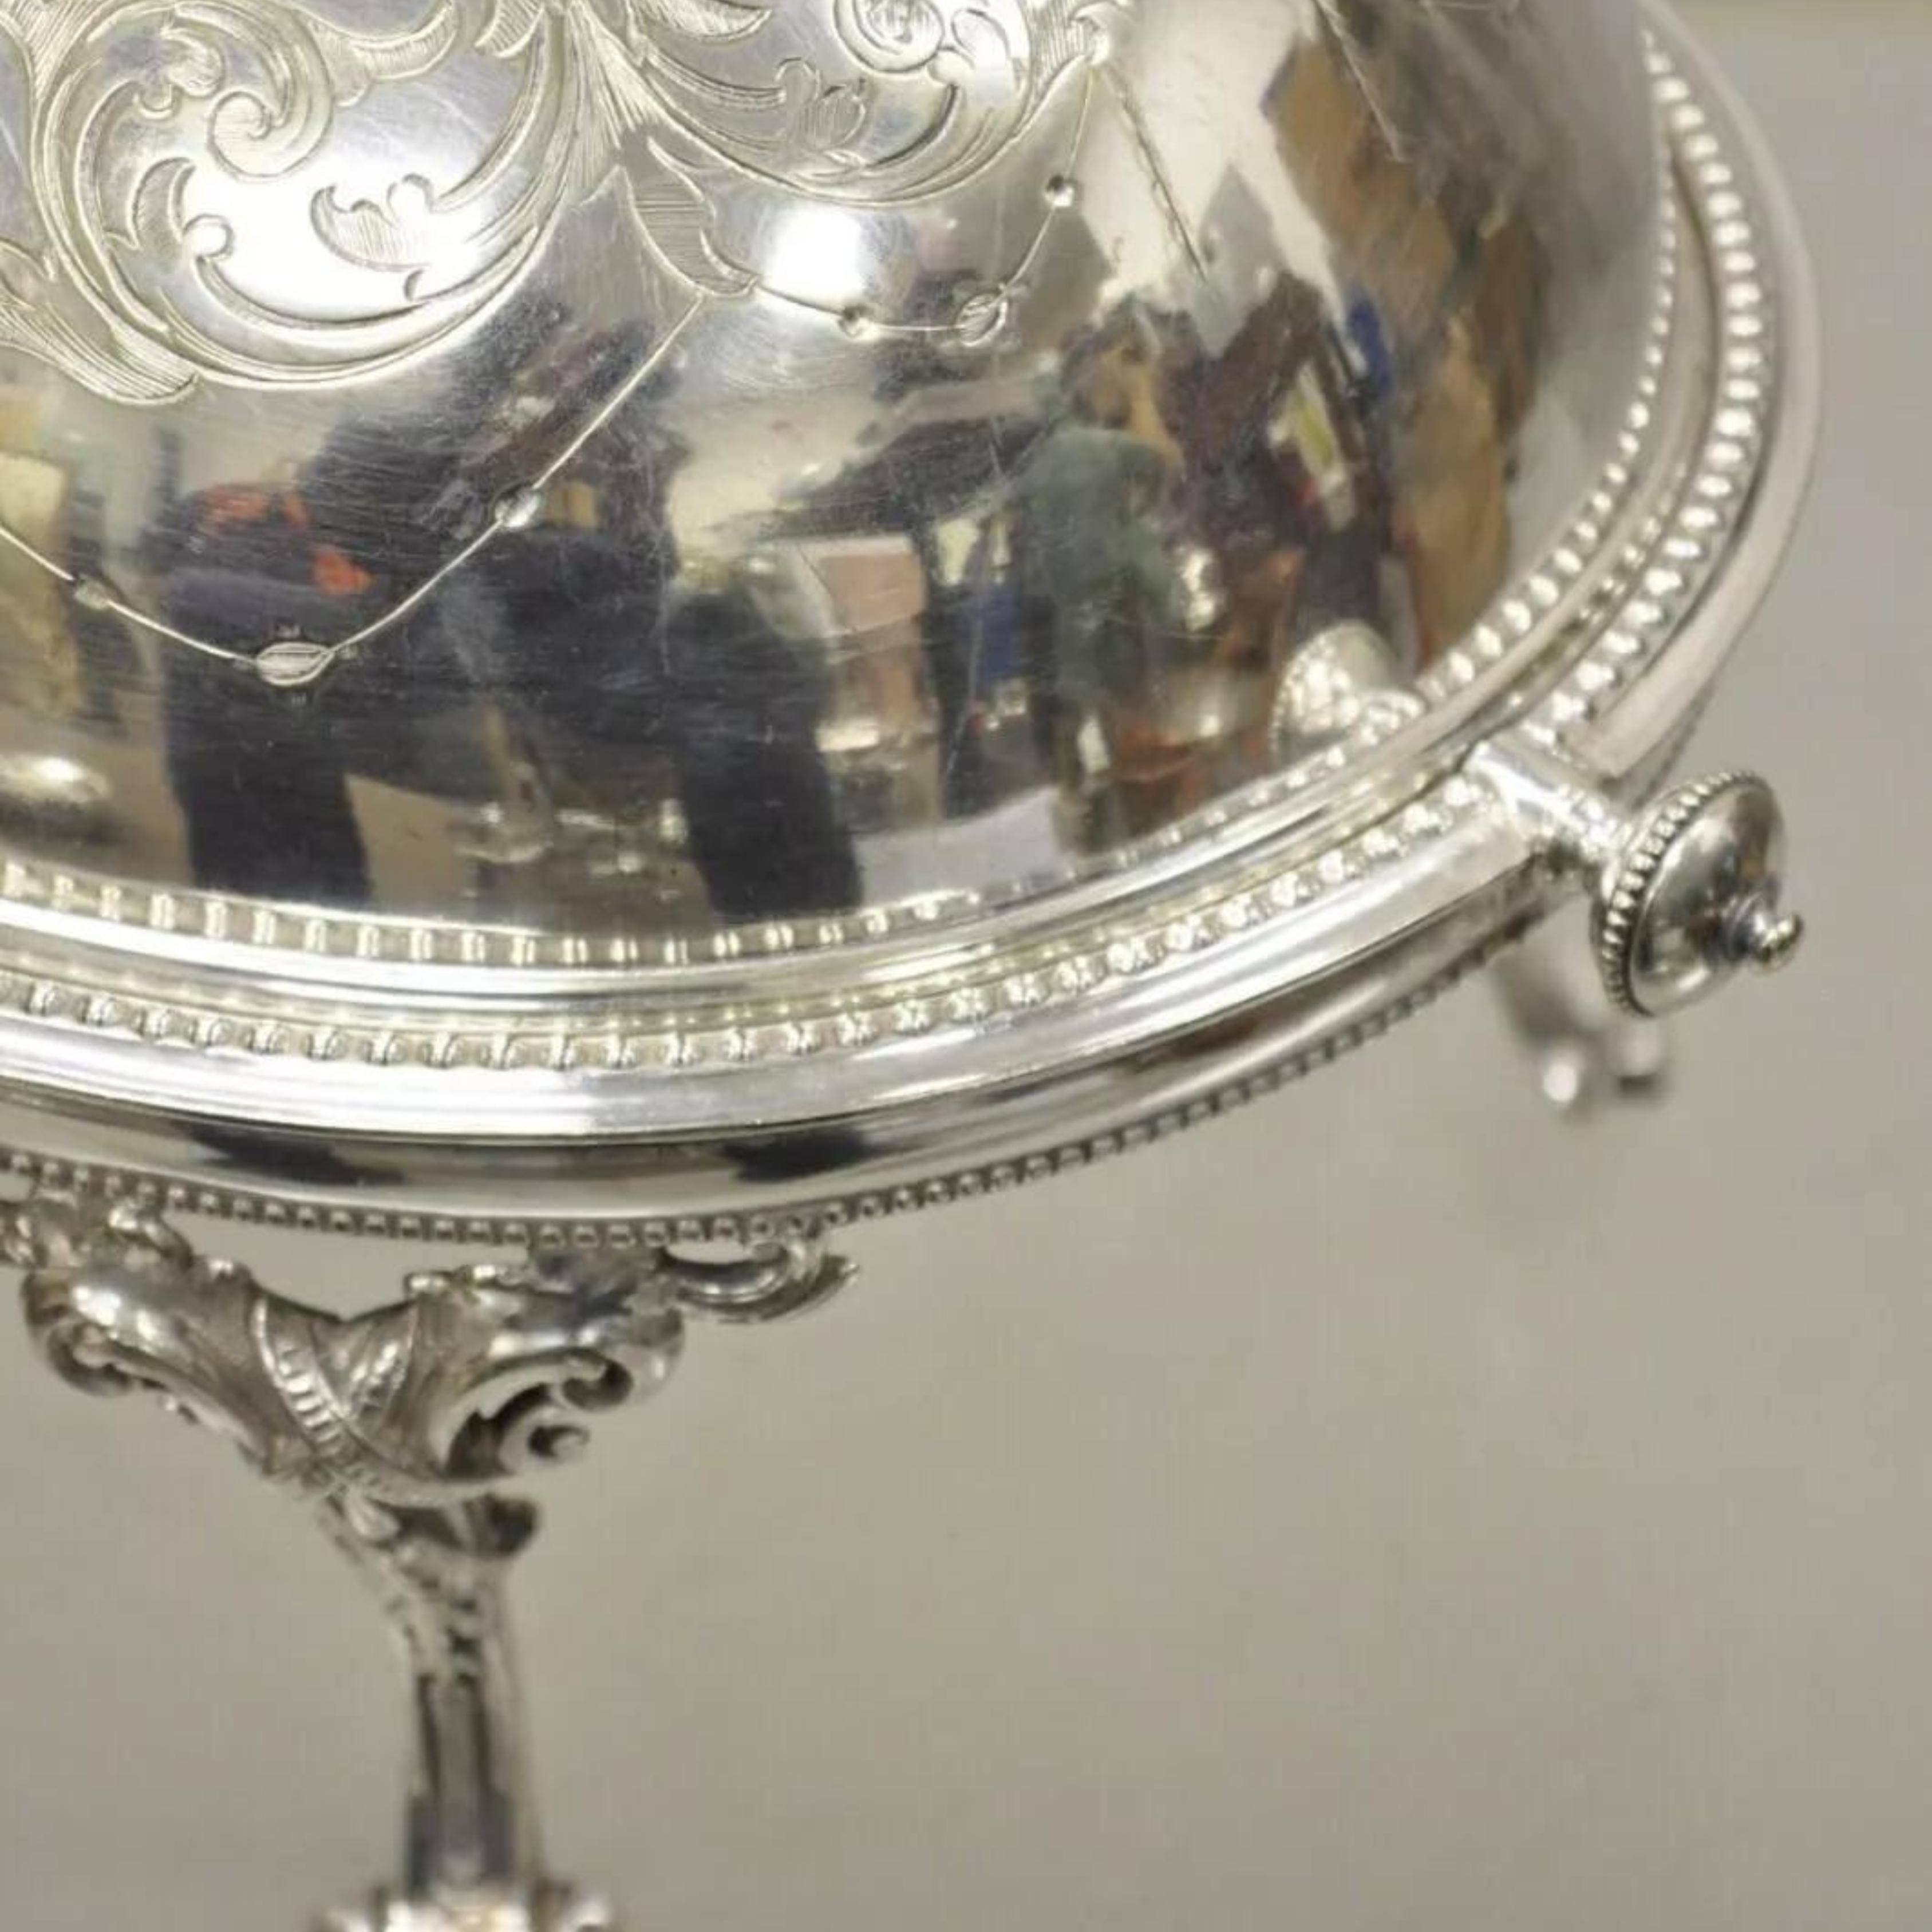 Antique Edwardian Silver Plated Revolving Dome Oval Chafing Dish Food Warmer For Sale 1